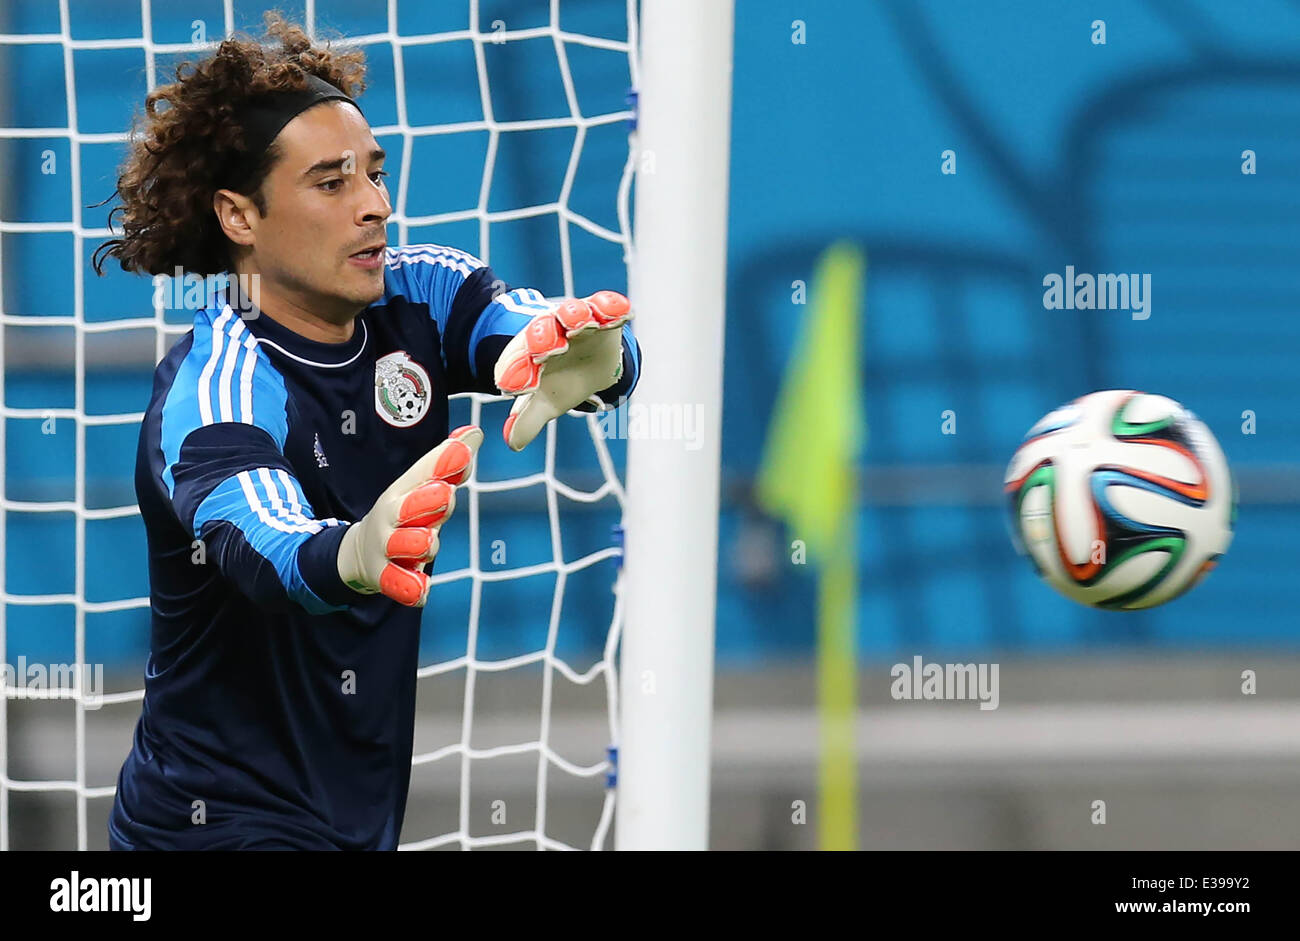 Recife, Brazil. 22nd June, 2014. Guillermo Ochoa, goalie of the Mexican national soccer team, takes part in a training session at the Arena Pernambuco, in Recife, Brazil, on June 22, 2014. Credit:  AGENCIA ESTADO/Xinhua/Alamy Live News Stock Photo